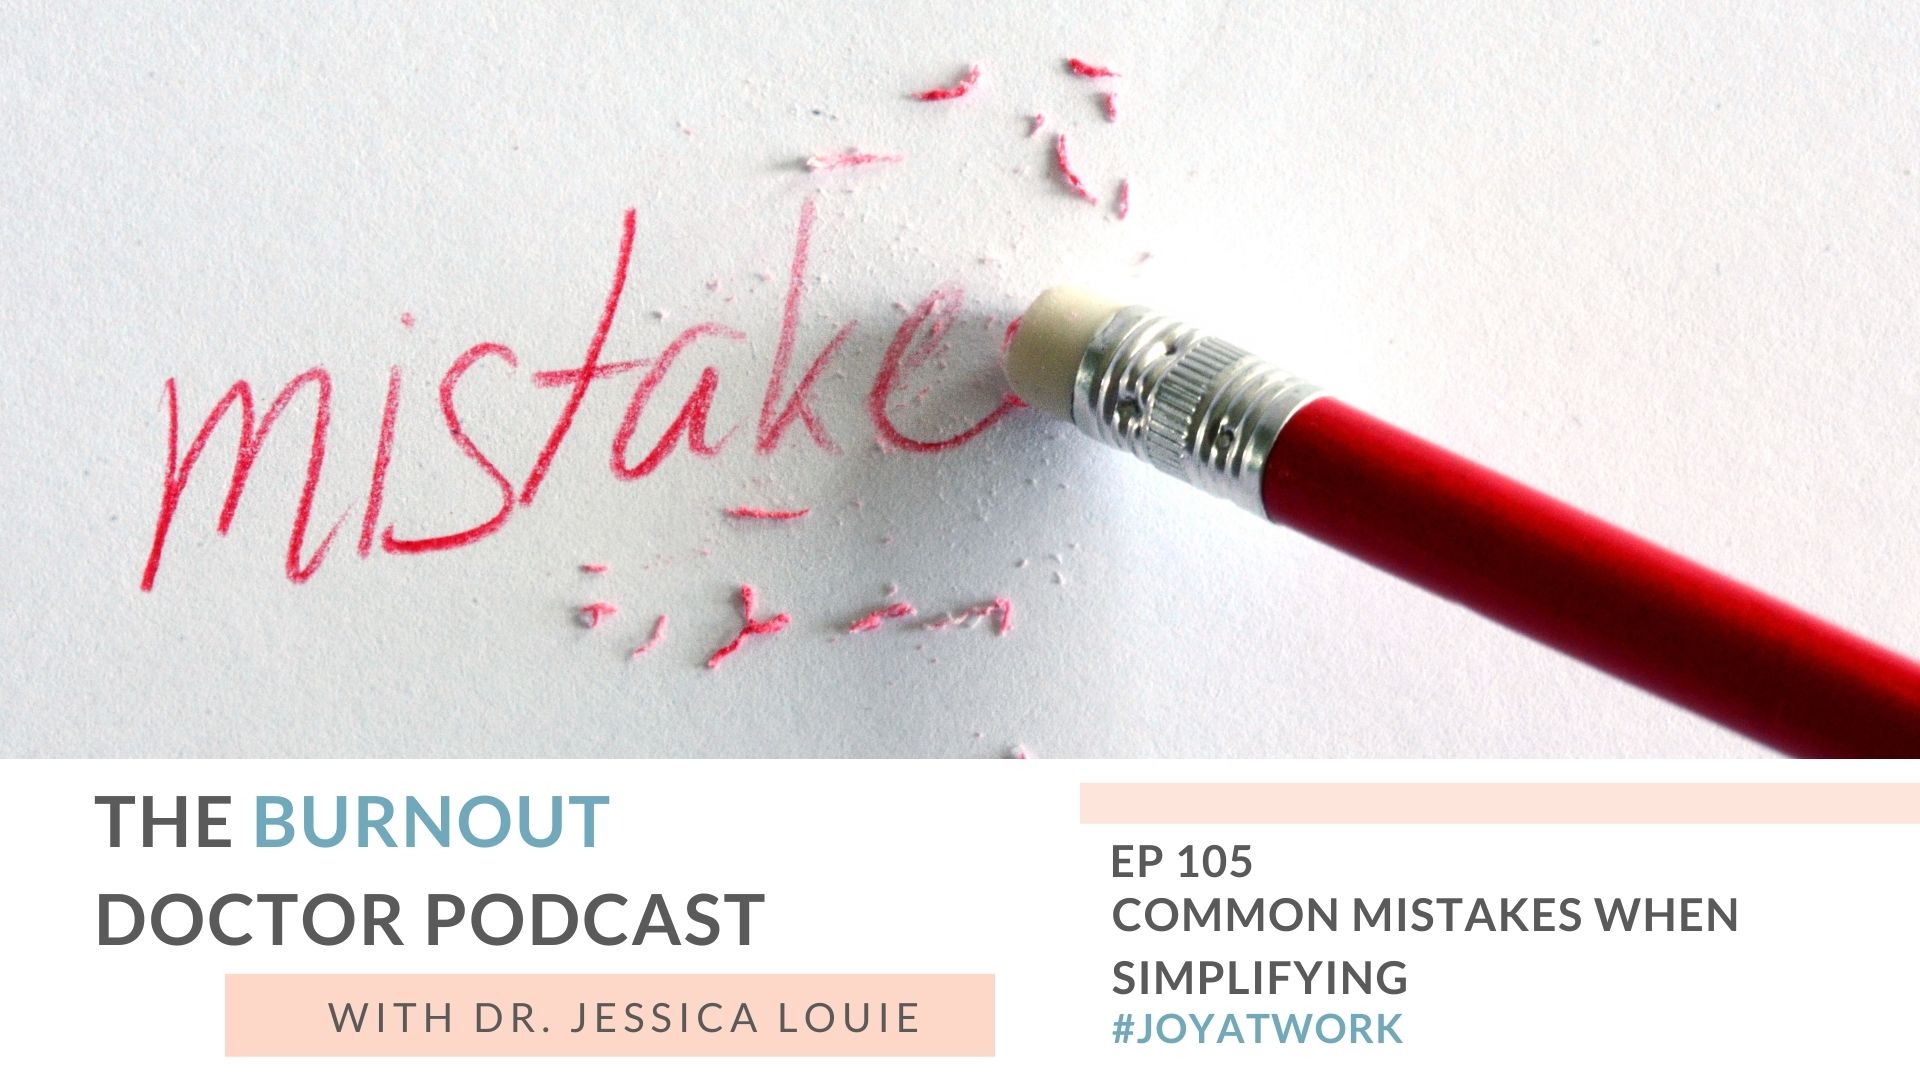 3 Mistakes using KonMari Method, minimalism, simplifying journey. Pharmacist burnout help. The Burnout Doctor Podcast. Dr. Jessica Louie simplifying healthcare families.